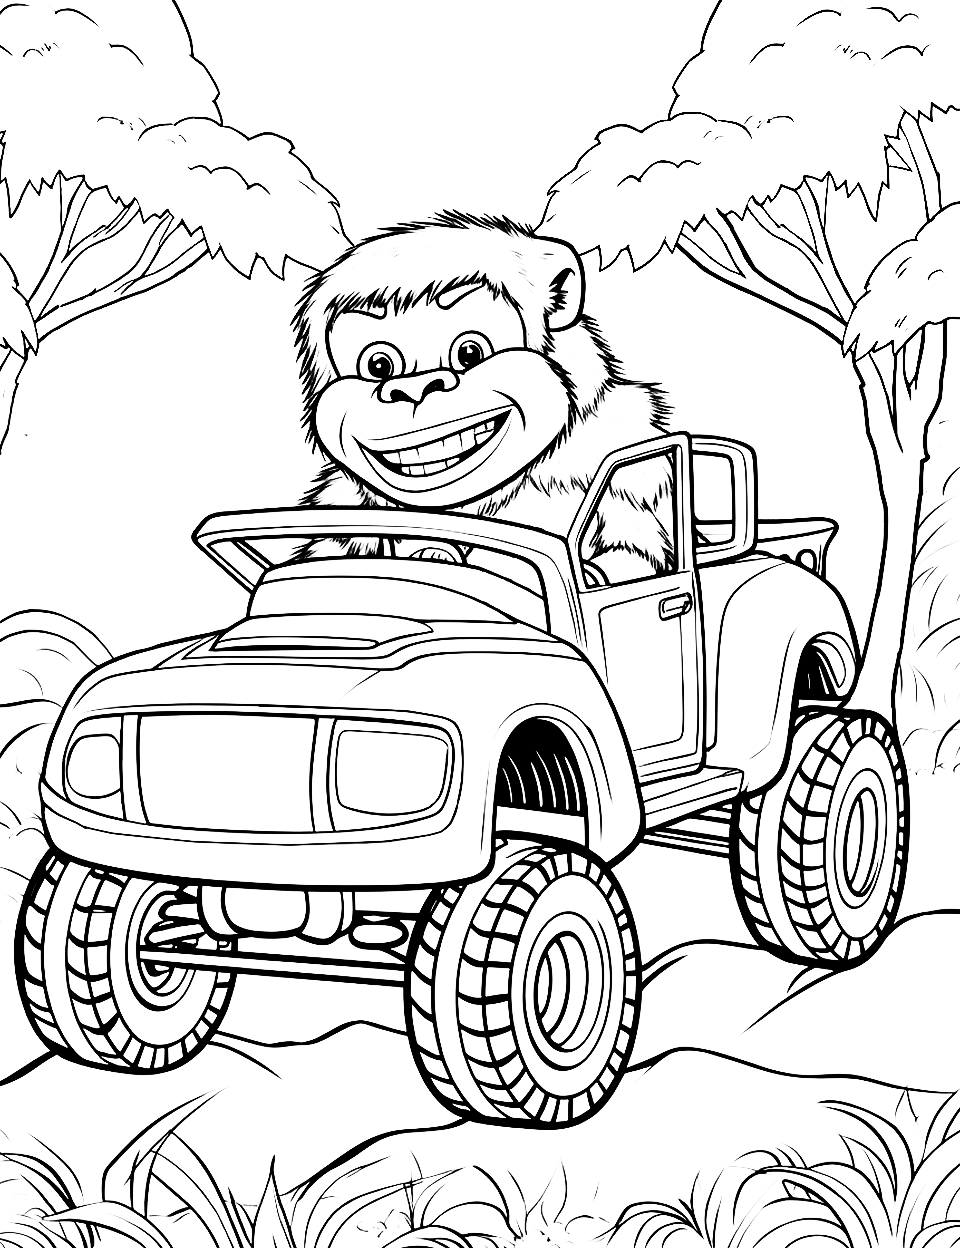 Monkey's Jungle Trucking Monster Truck Coloring Page - A monkey driving his Monster Truck through the jungle.